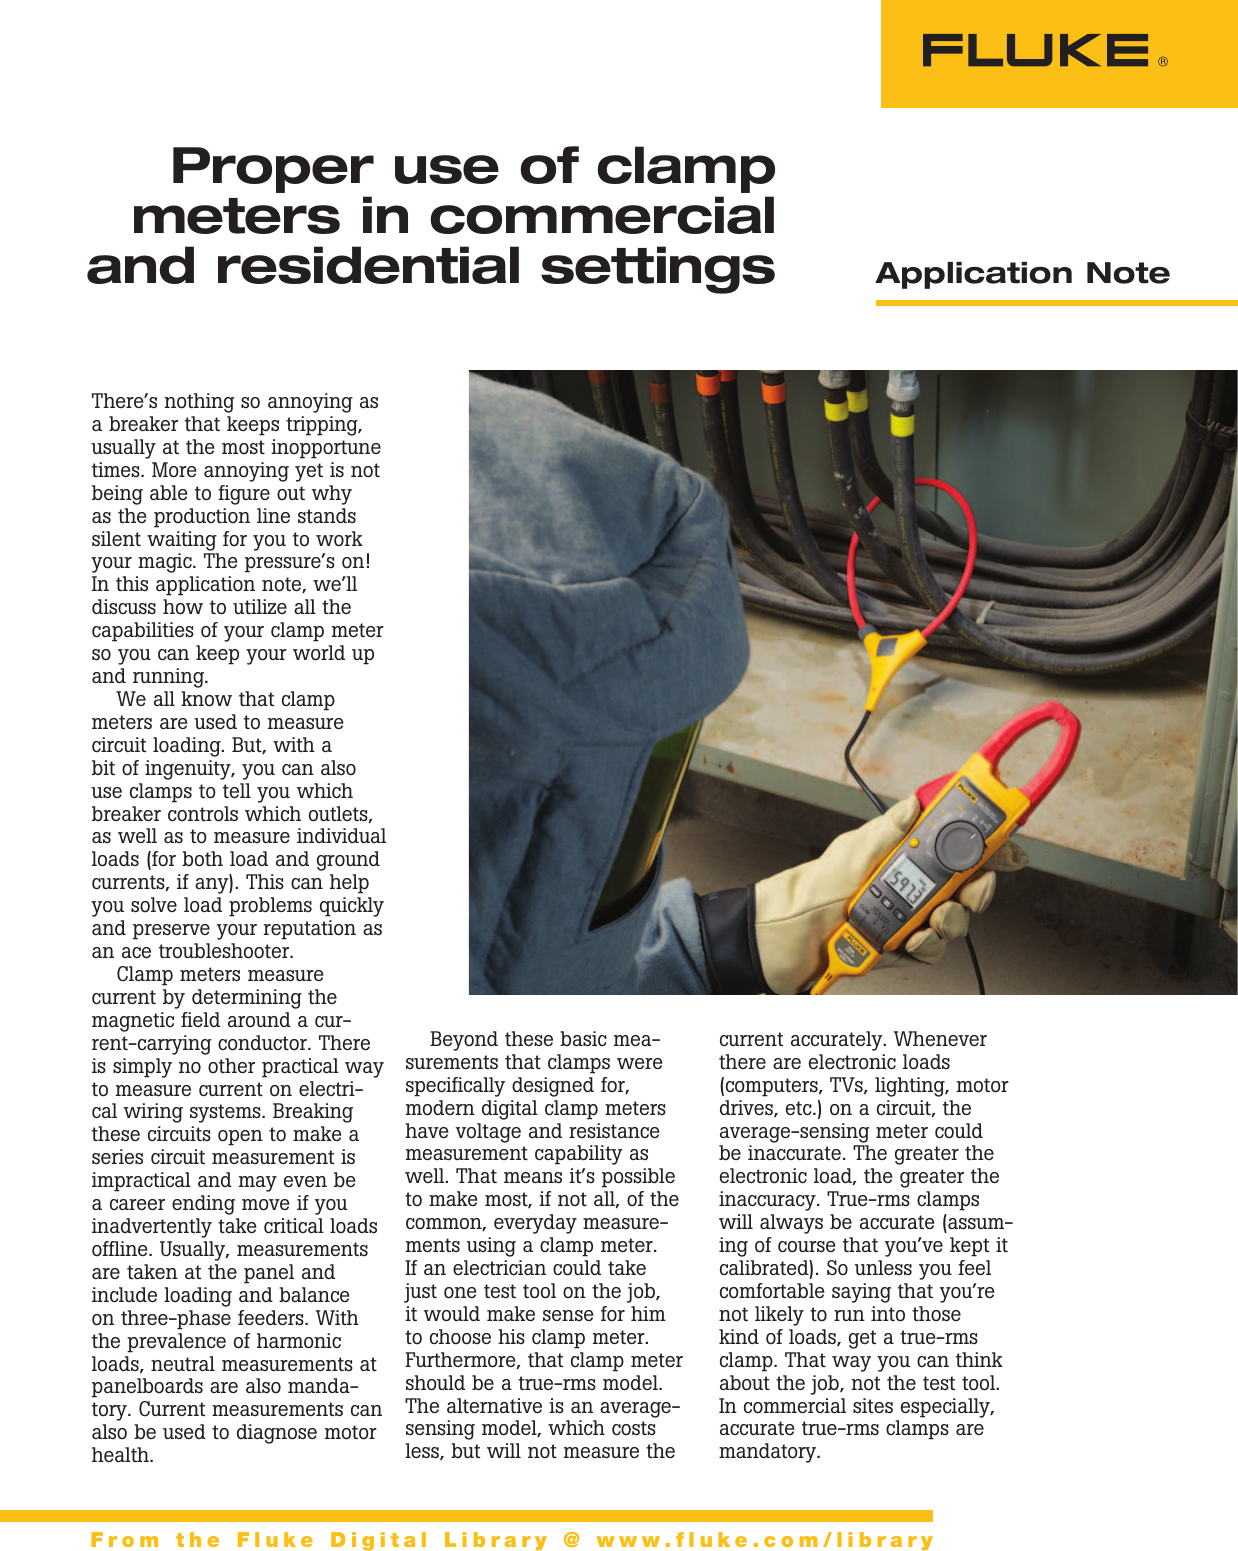 Page 1 of 3 - Fluke Fluke-373-Application-Note- Proper Use Of Clamp Meters In Commercial And Residential Settings  Fluke-373-application-note